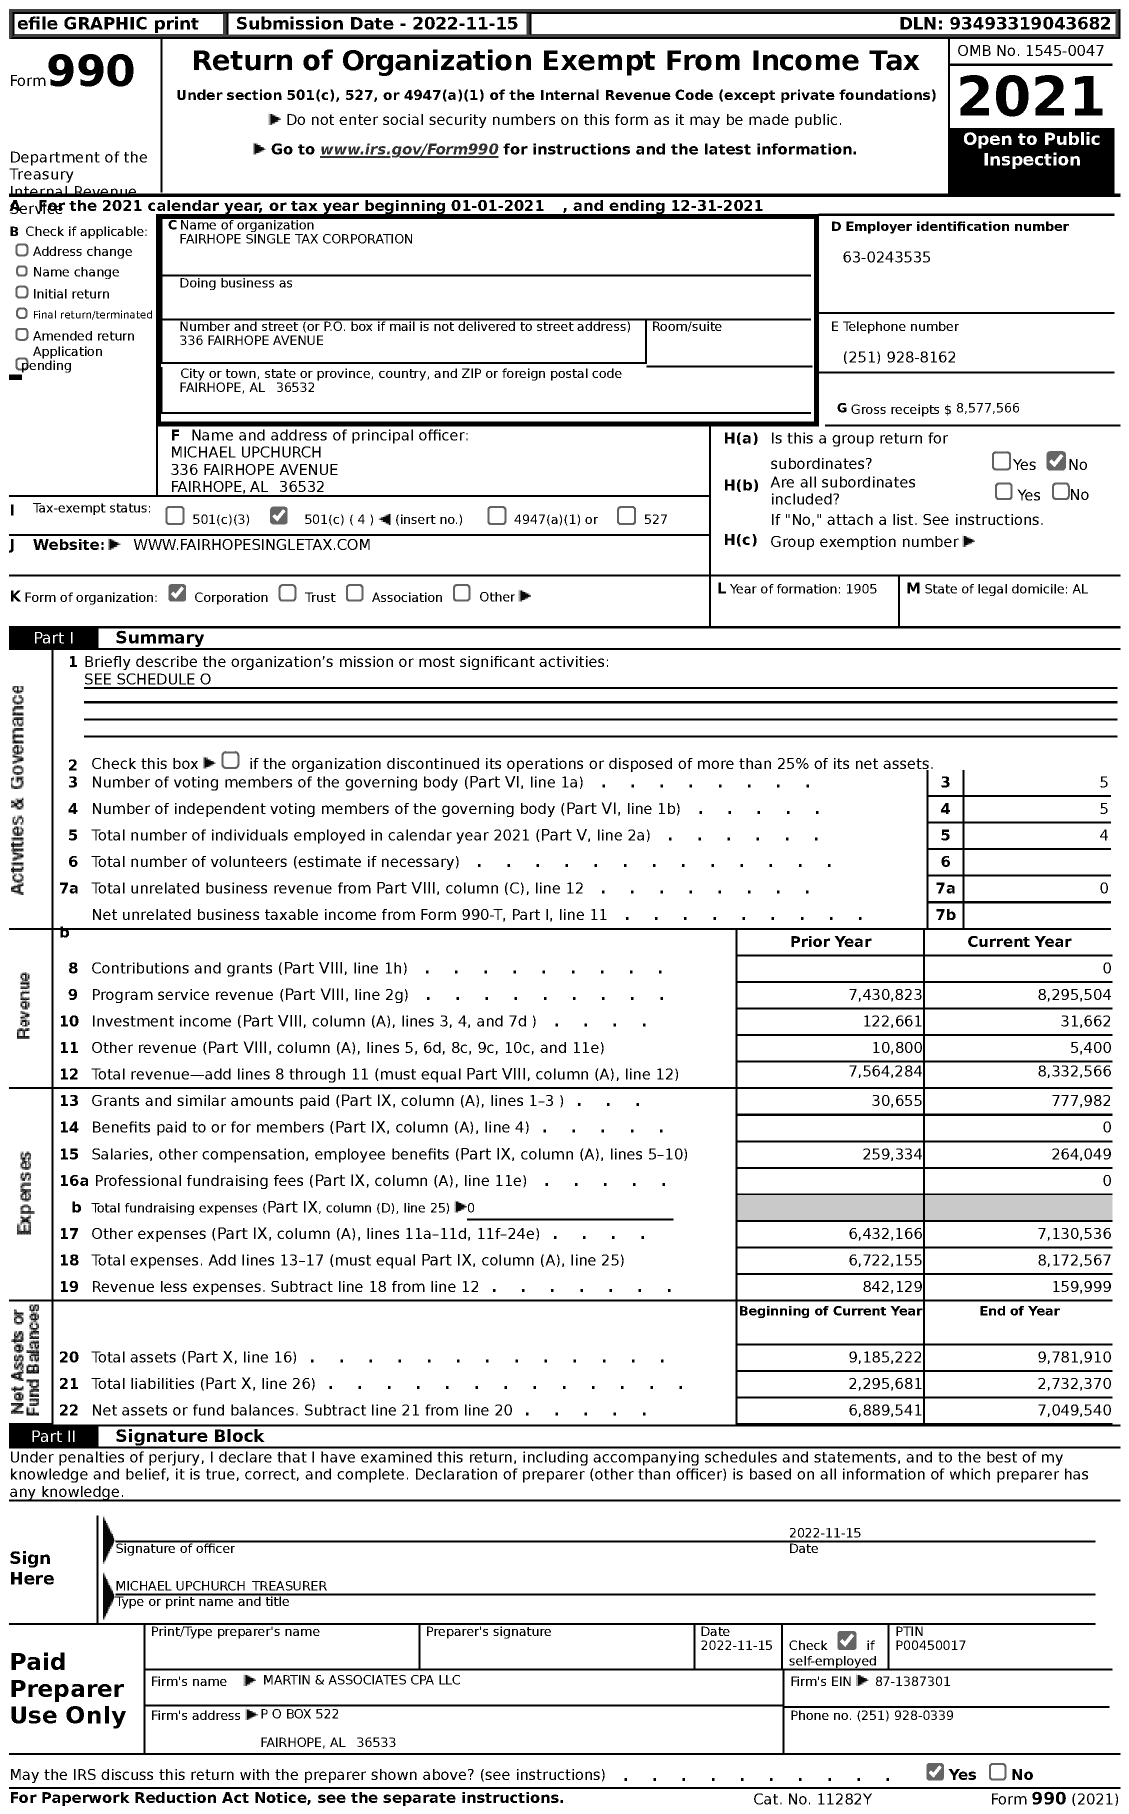 Image of first page of 2021 Form 990 for Fairhope Single Tax Corporation